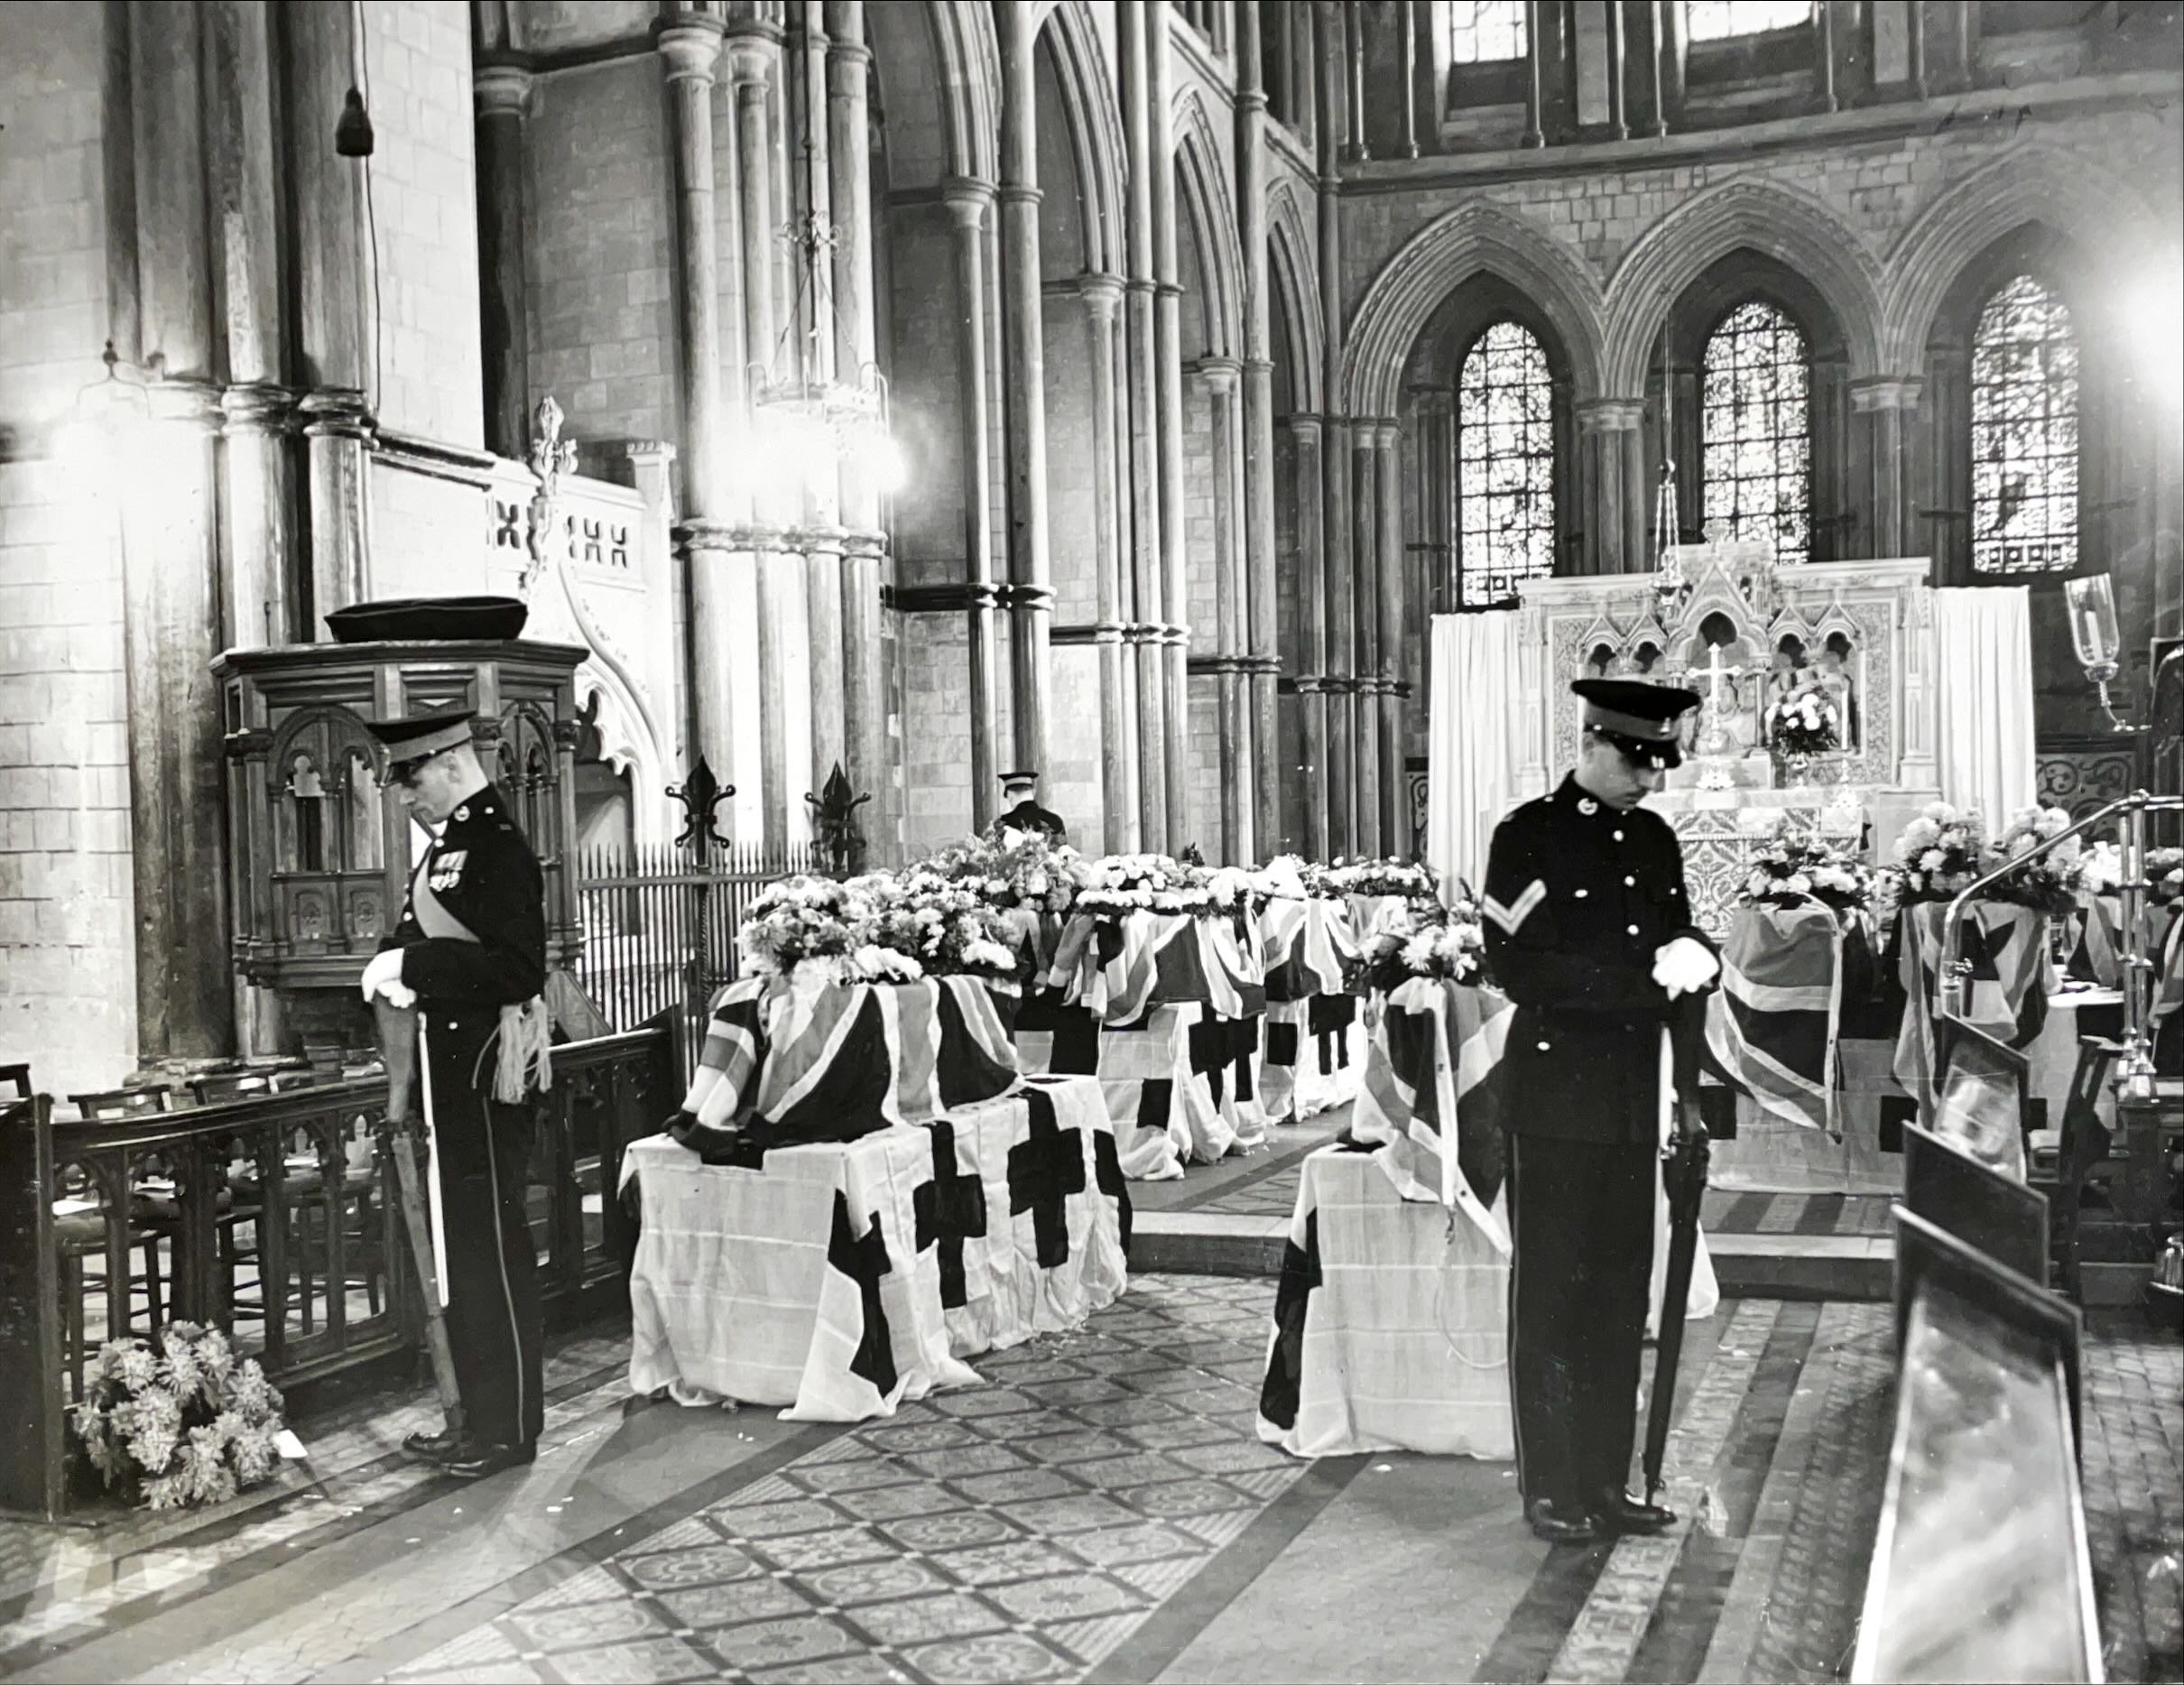 Royal Marines' Cadets' Funeral, December 1951 (1 of 3) Royal Marines on guard during the lying in state